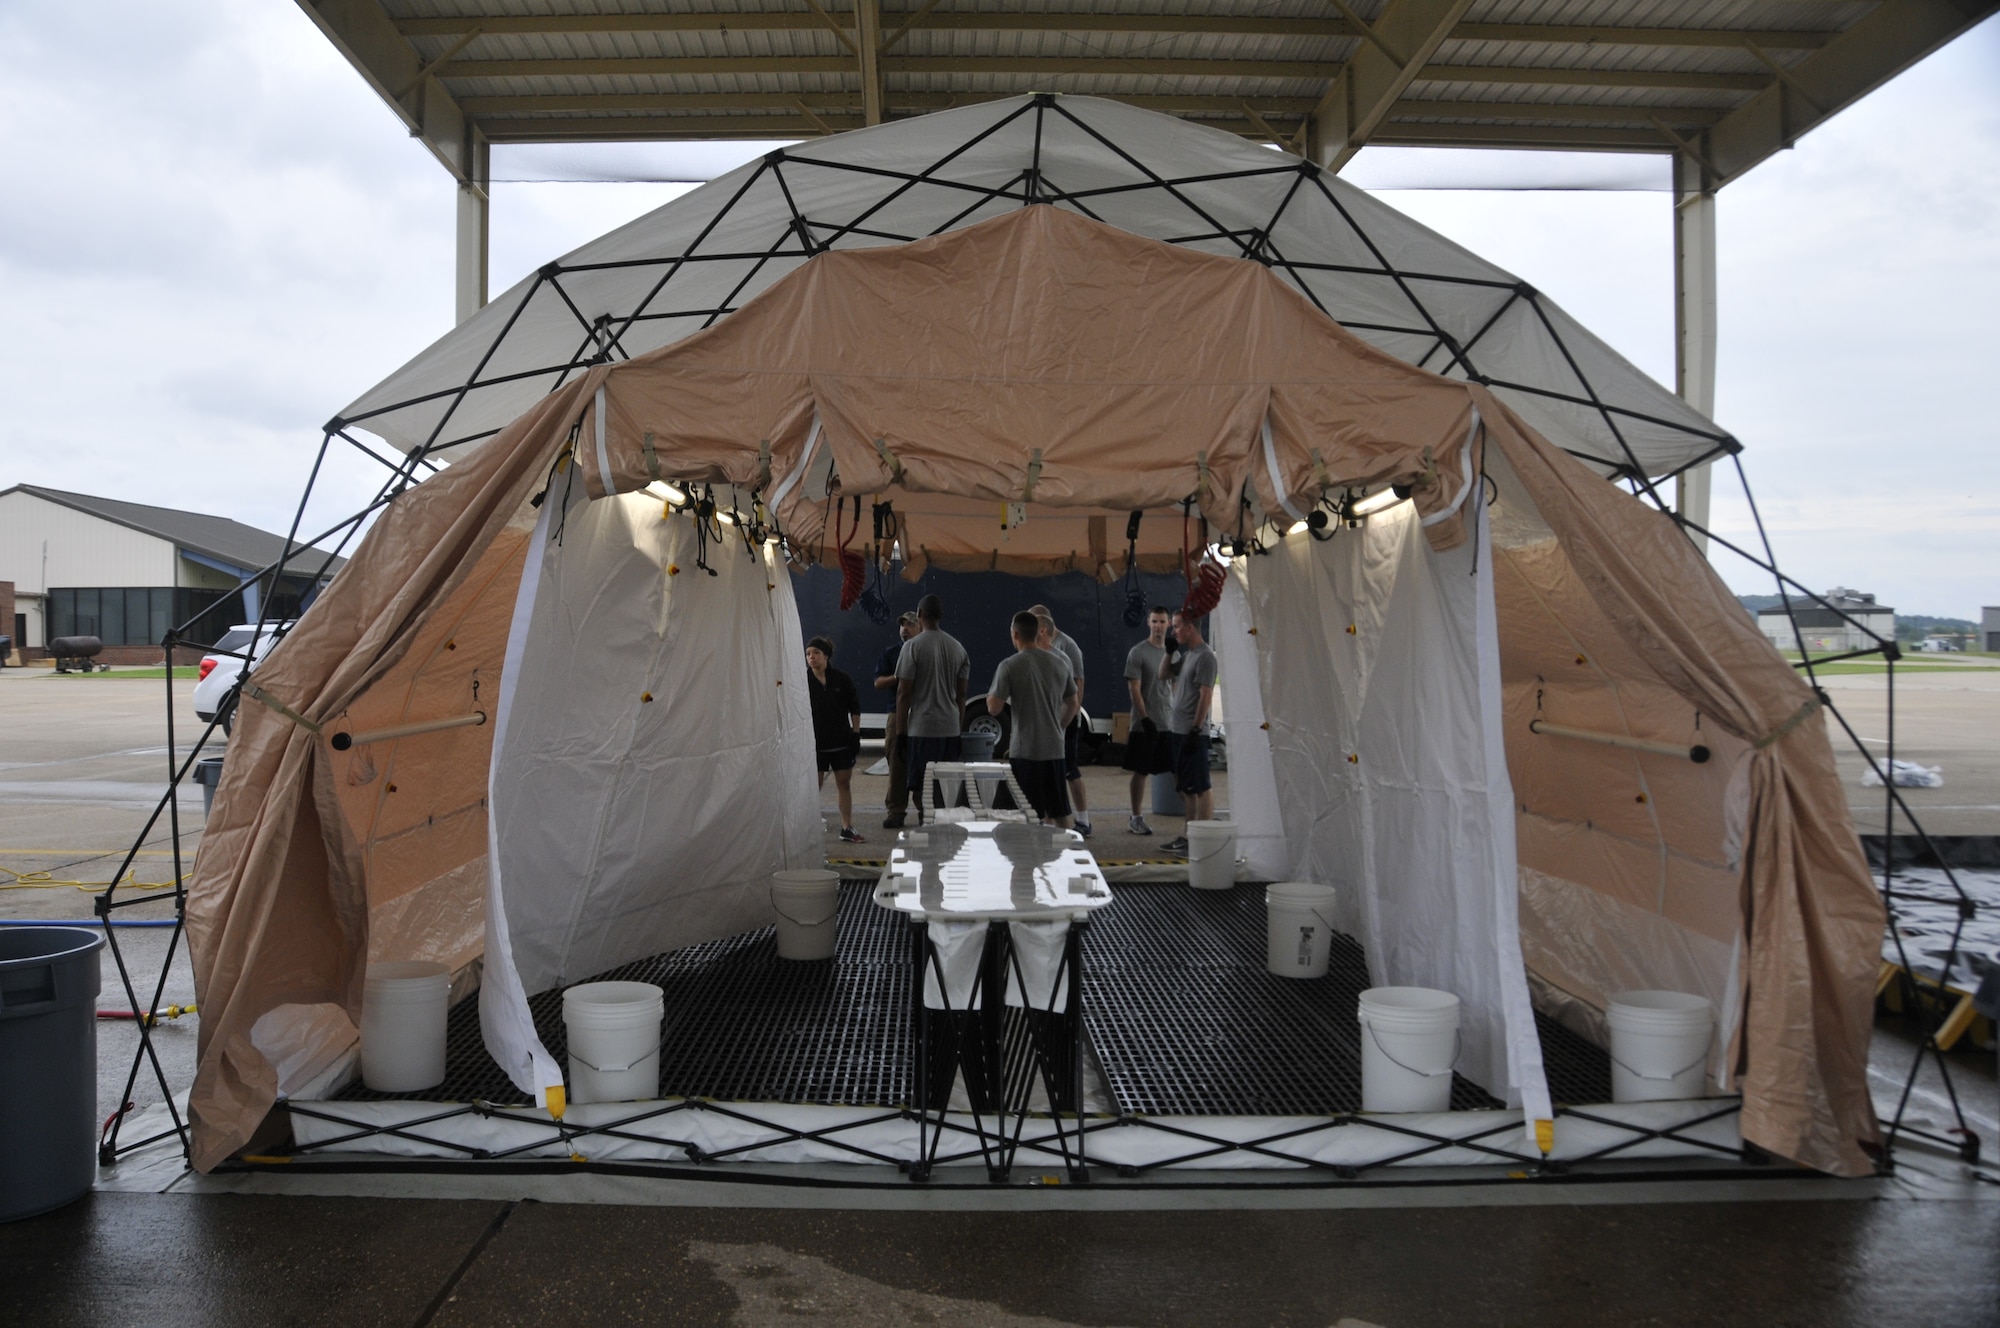 Airmen from the 188th Wing attend decontamination training at Ebbing Air National Guard Base, Arkansas, July 17. The volunteers, who were from various parts of the wing, learned how to set up a decontamination tent and clean victims of various chemical or nuclear hazards. This training will aid the wing in its mission to support Arkansas citizens in times of disaster. (U.S. Air National Guard photo by Staff Sgt. John Suleski/released)